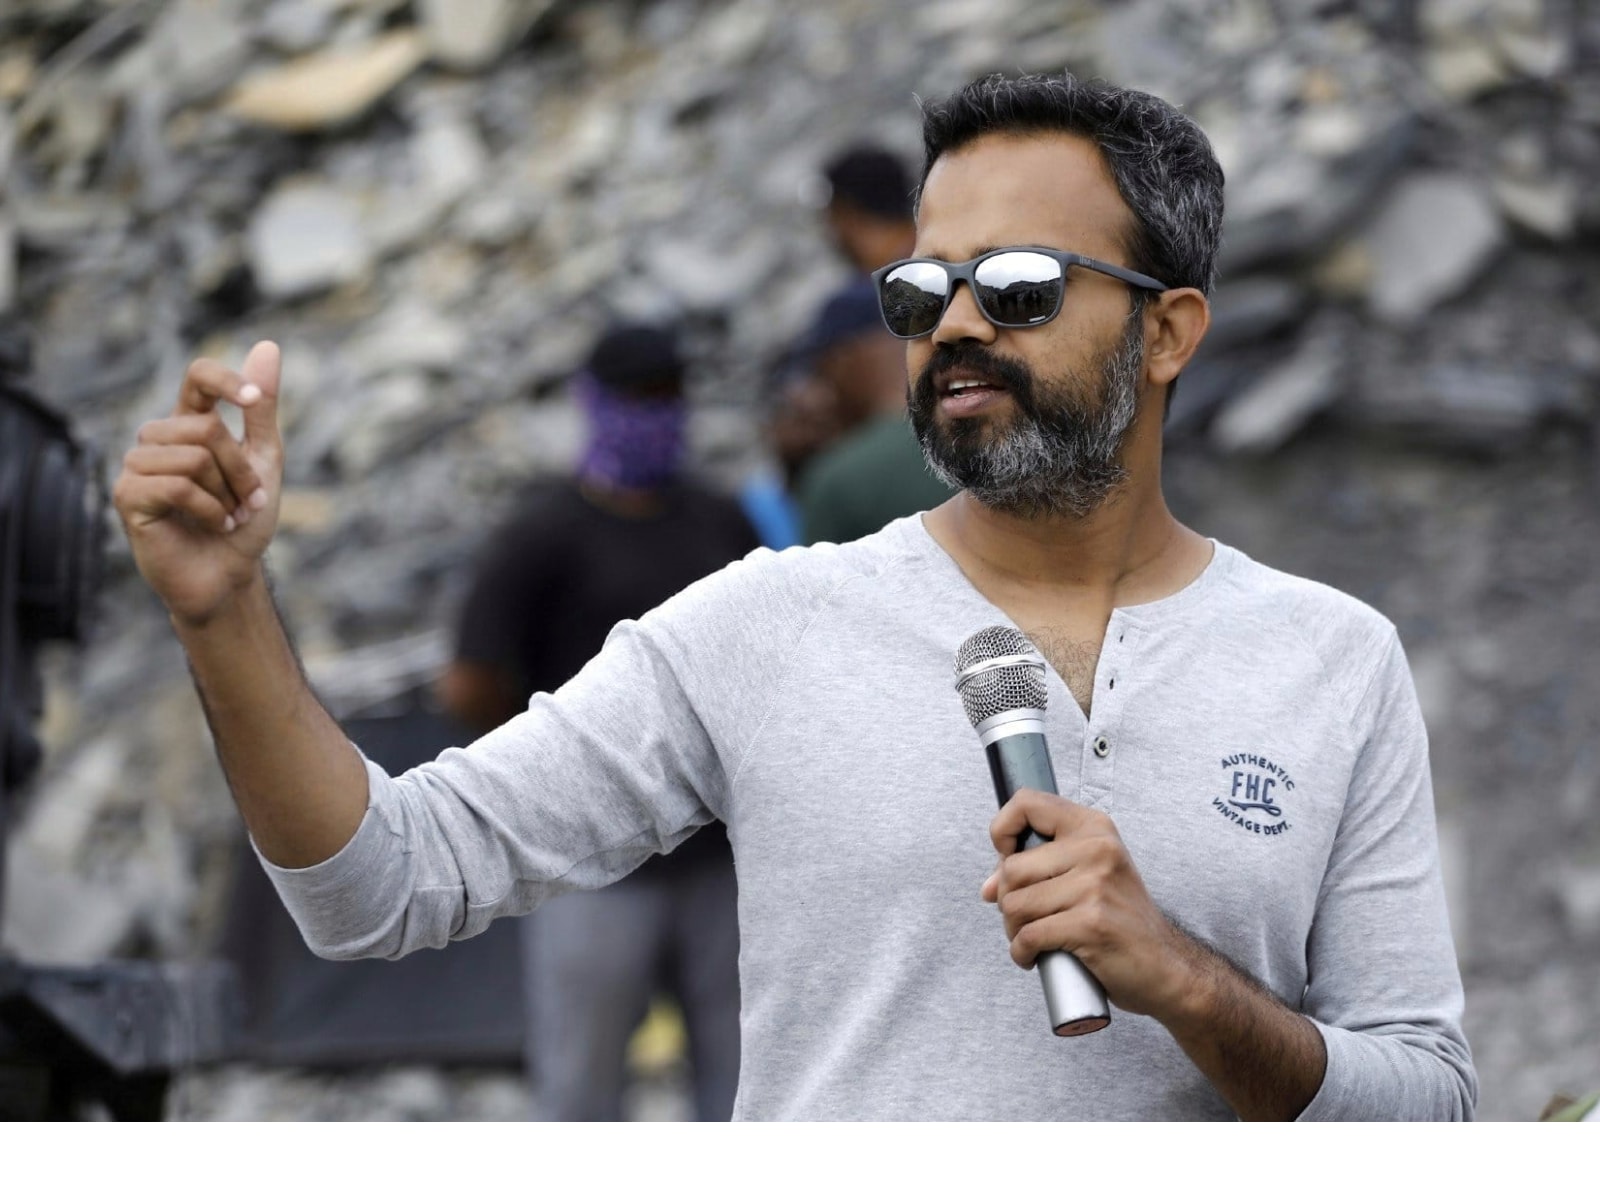 KGF Director Prashanth Neel's Special Connection With Andhra Pradesh. Learn More - News18